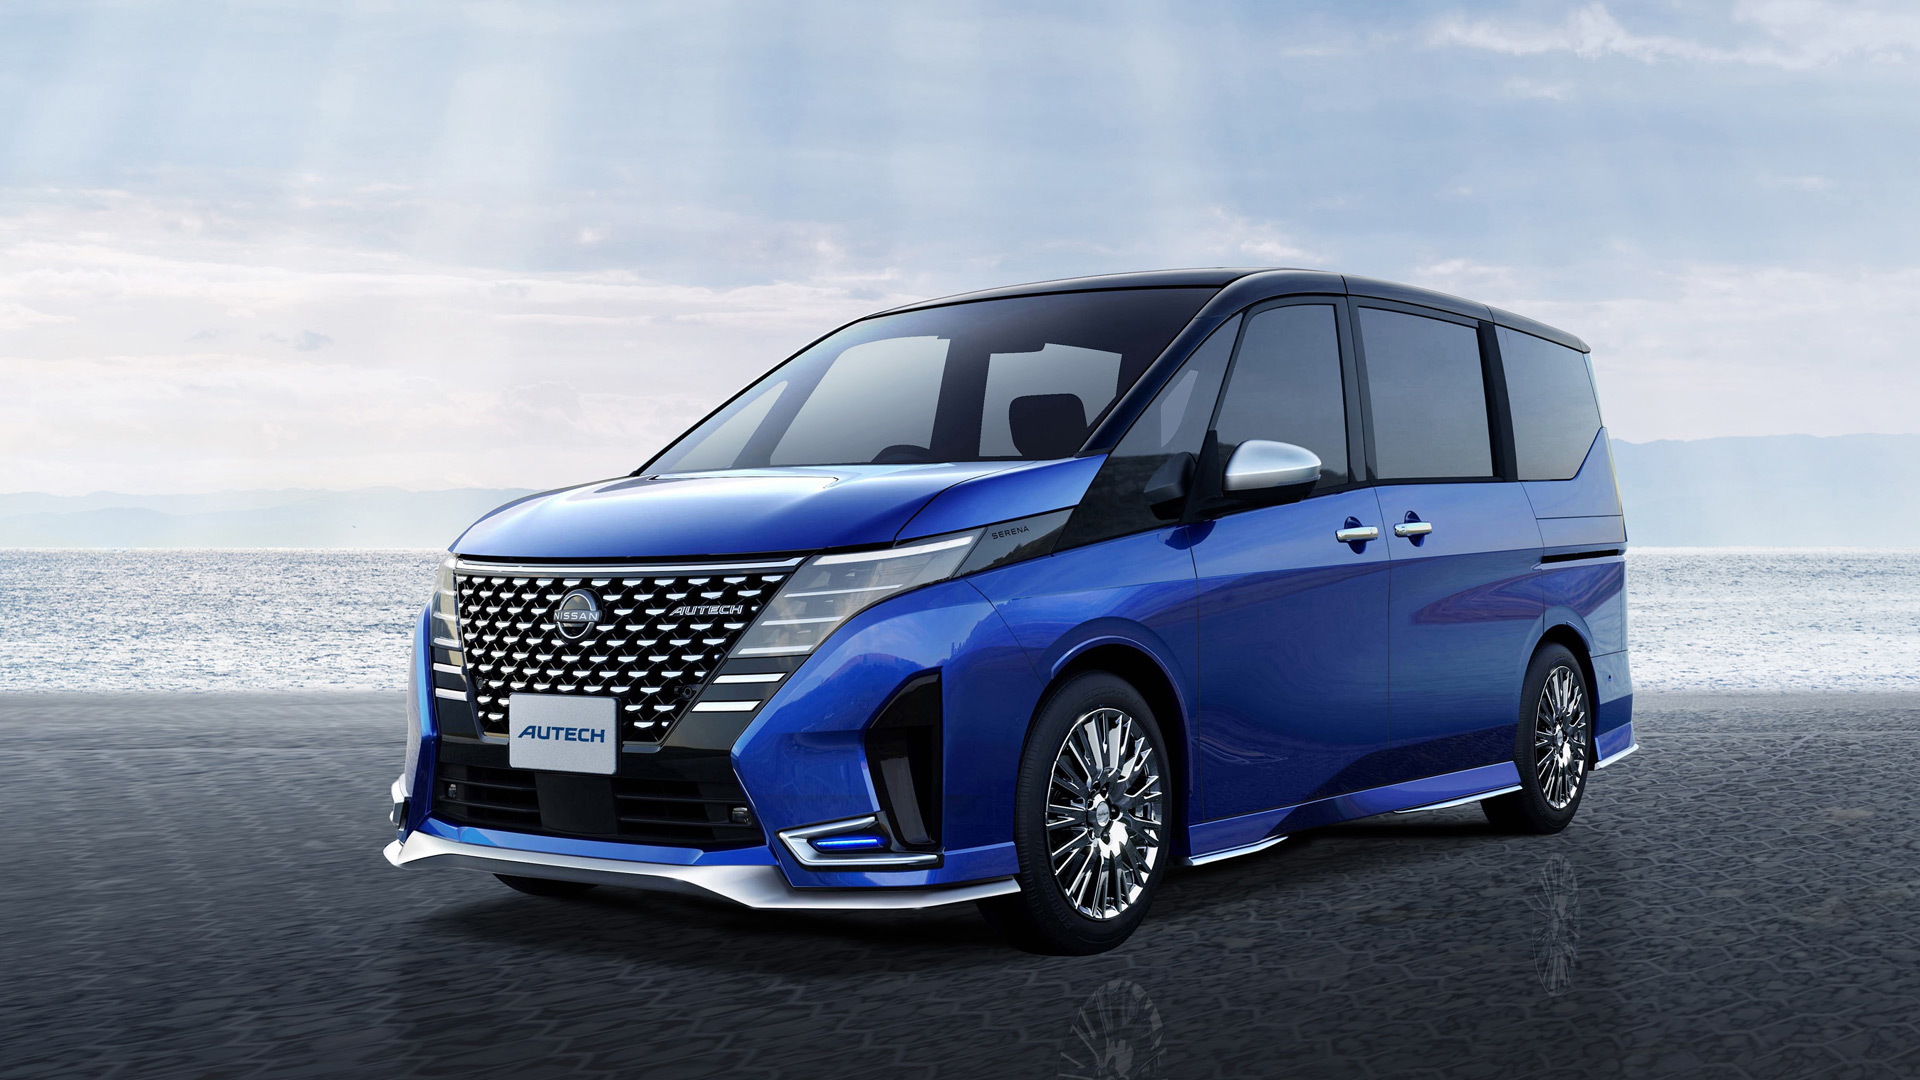 Nissan Serena customized by Autech